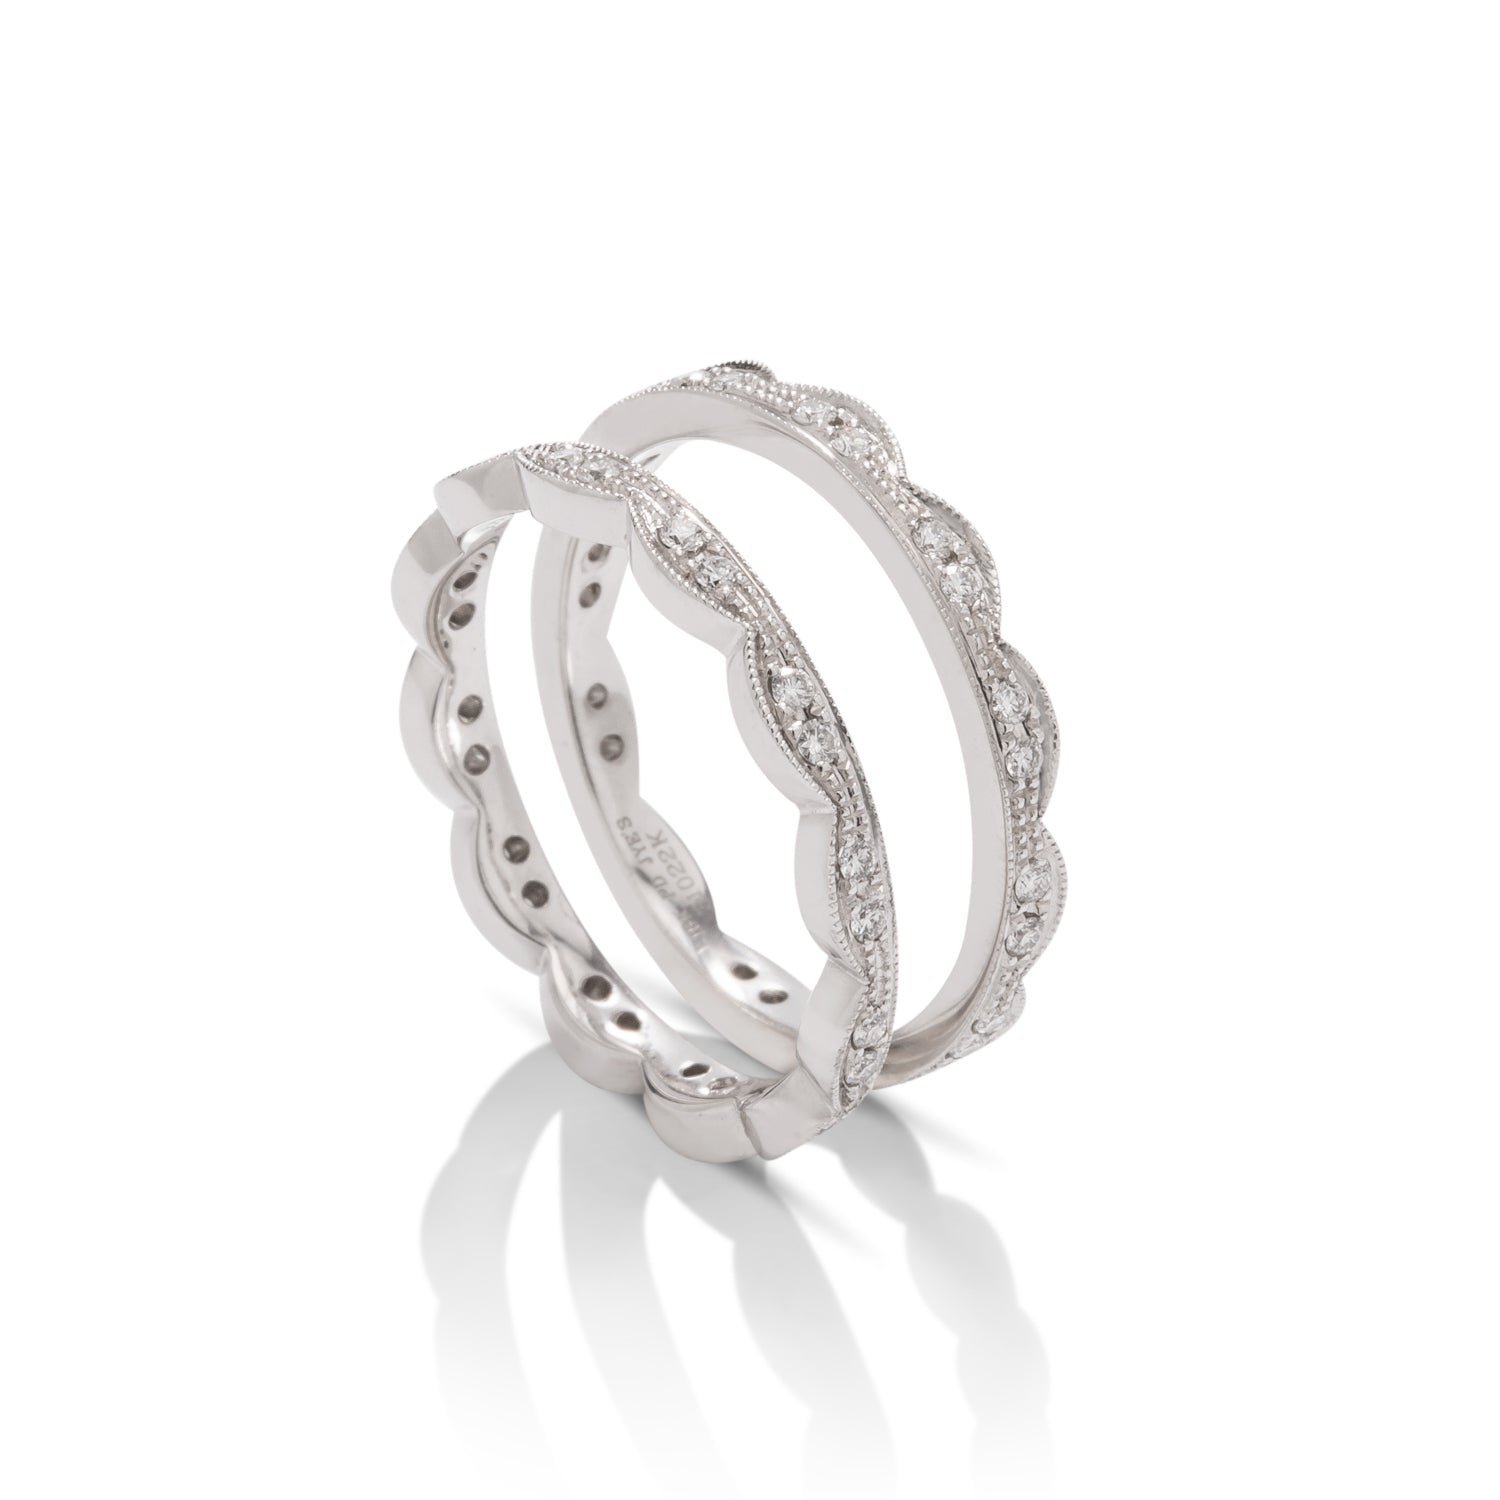 Pair of 18k White Gold Stackable Diamond Rings - Charles Koll Jewellers